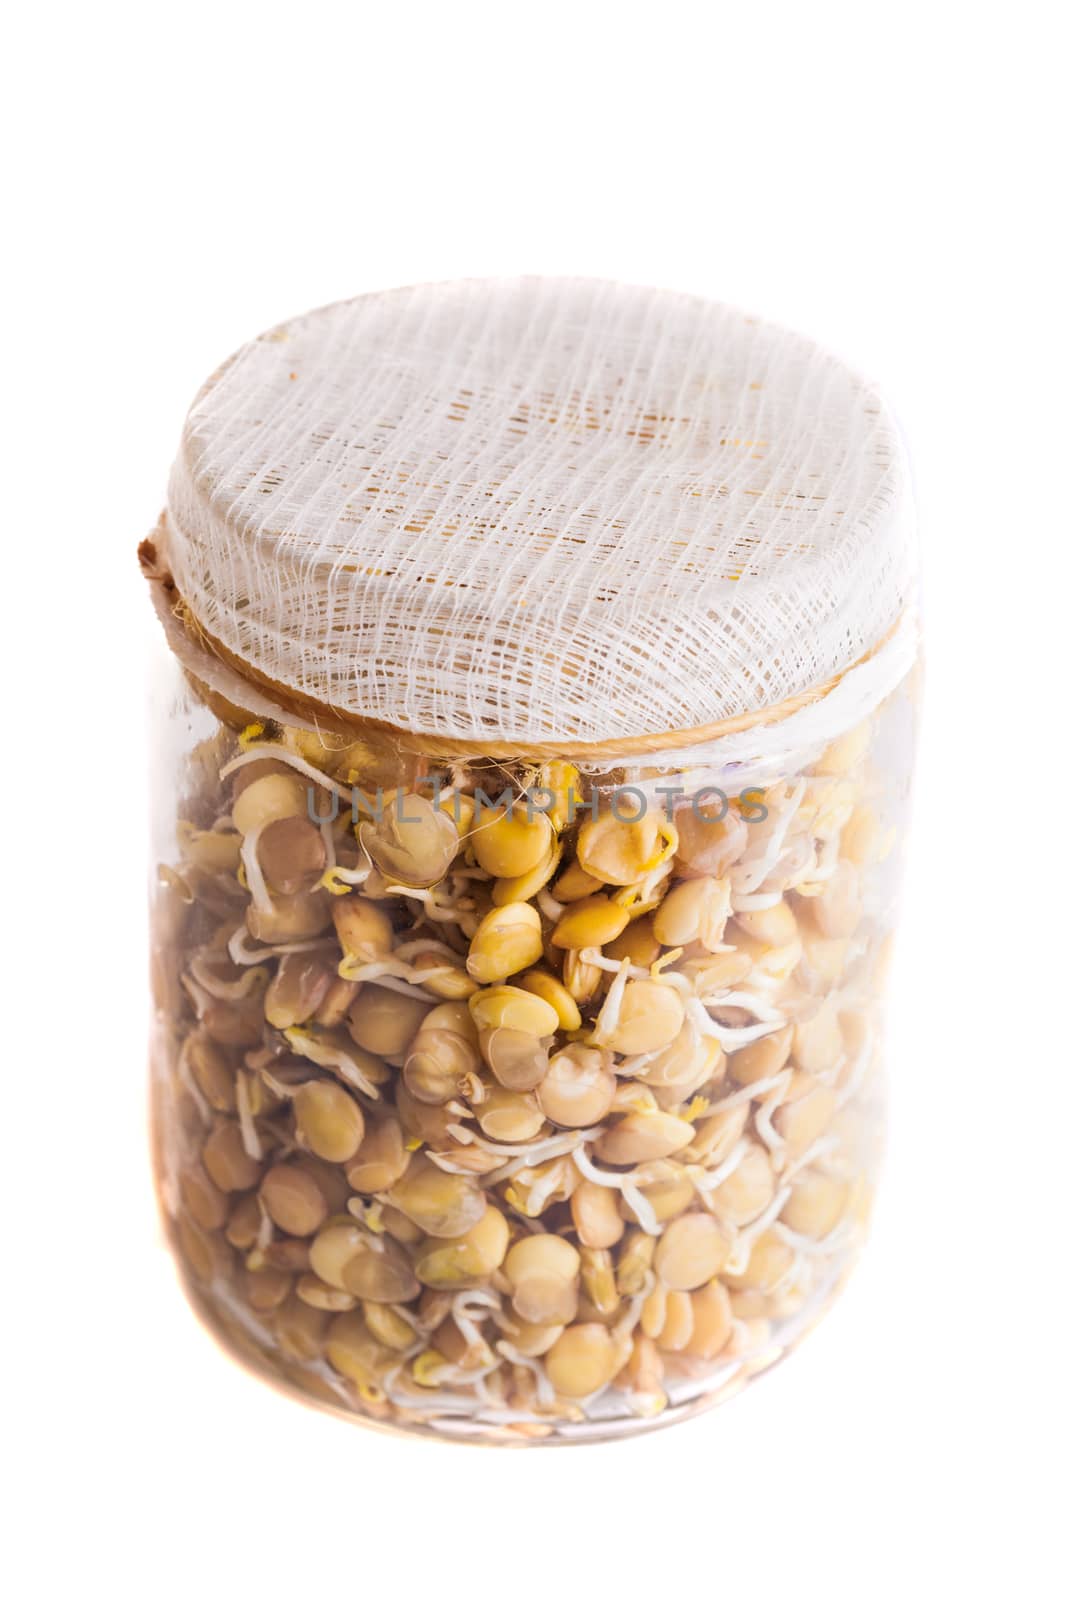 Top View of Sprouting Lentils Growing in a Glass Jar Isolated on White Background